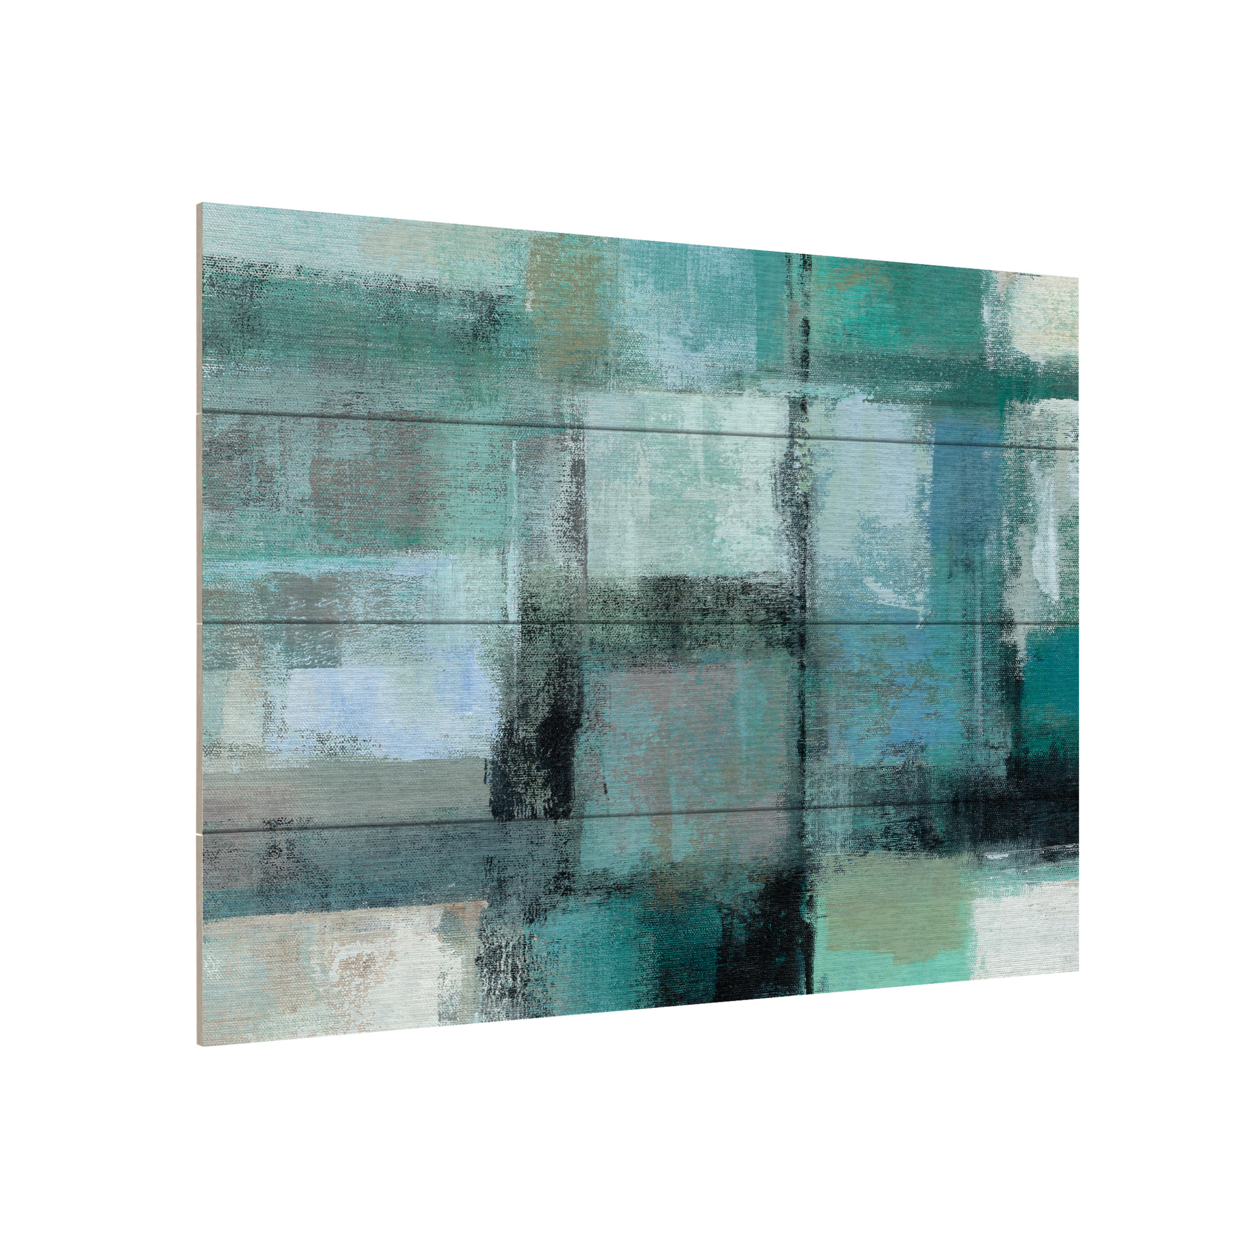 Wall Art 12 X 16 Inches Titled Island Hues Crop I Ready To Hang Printed On Wooden Planks